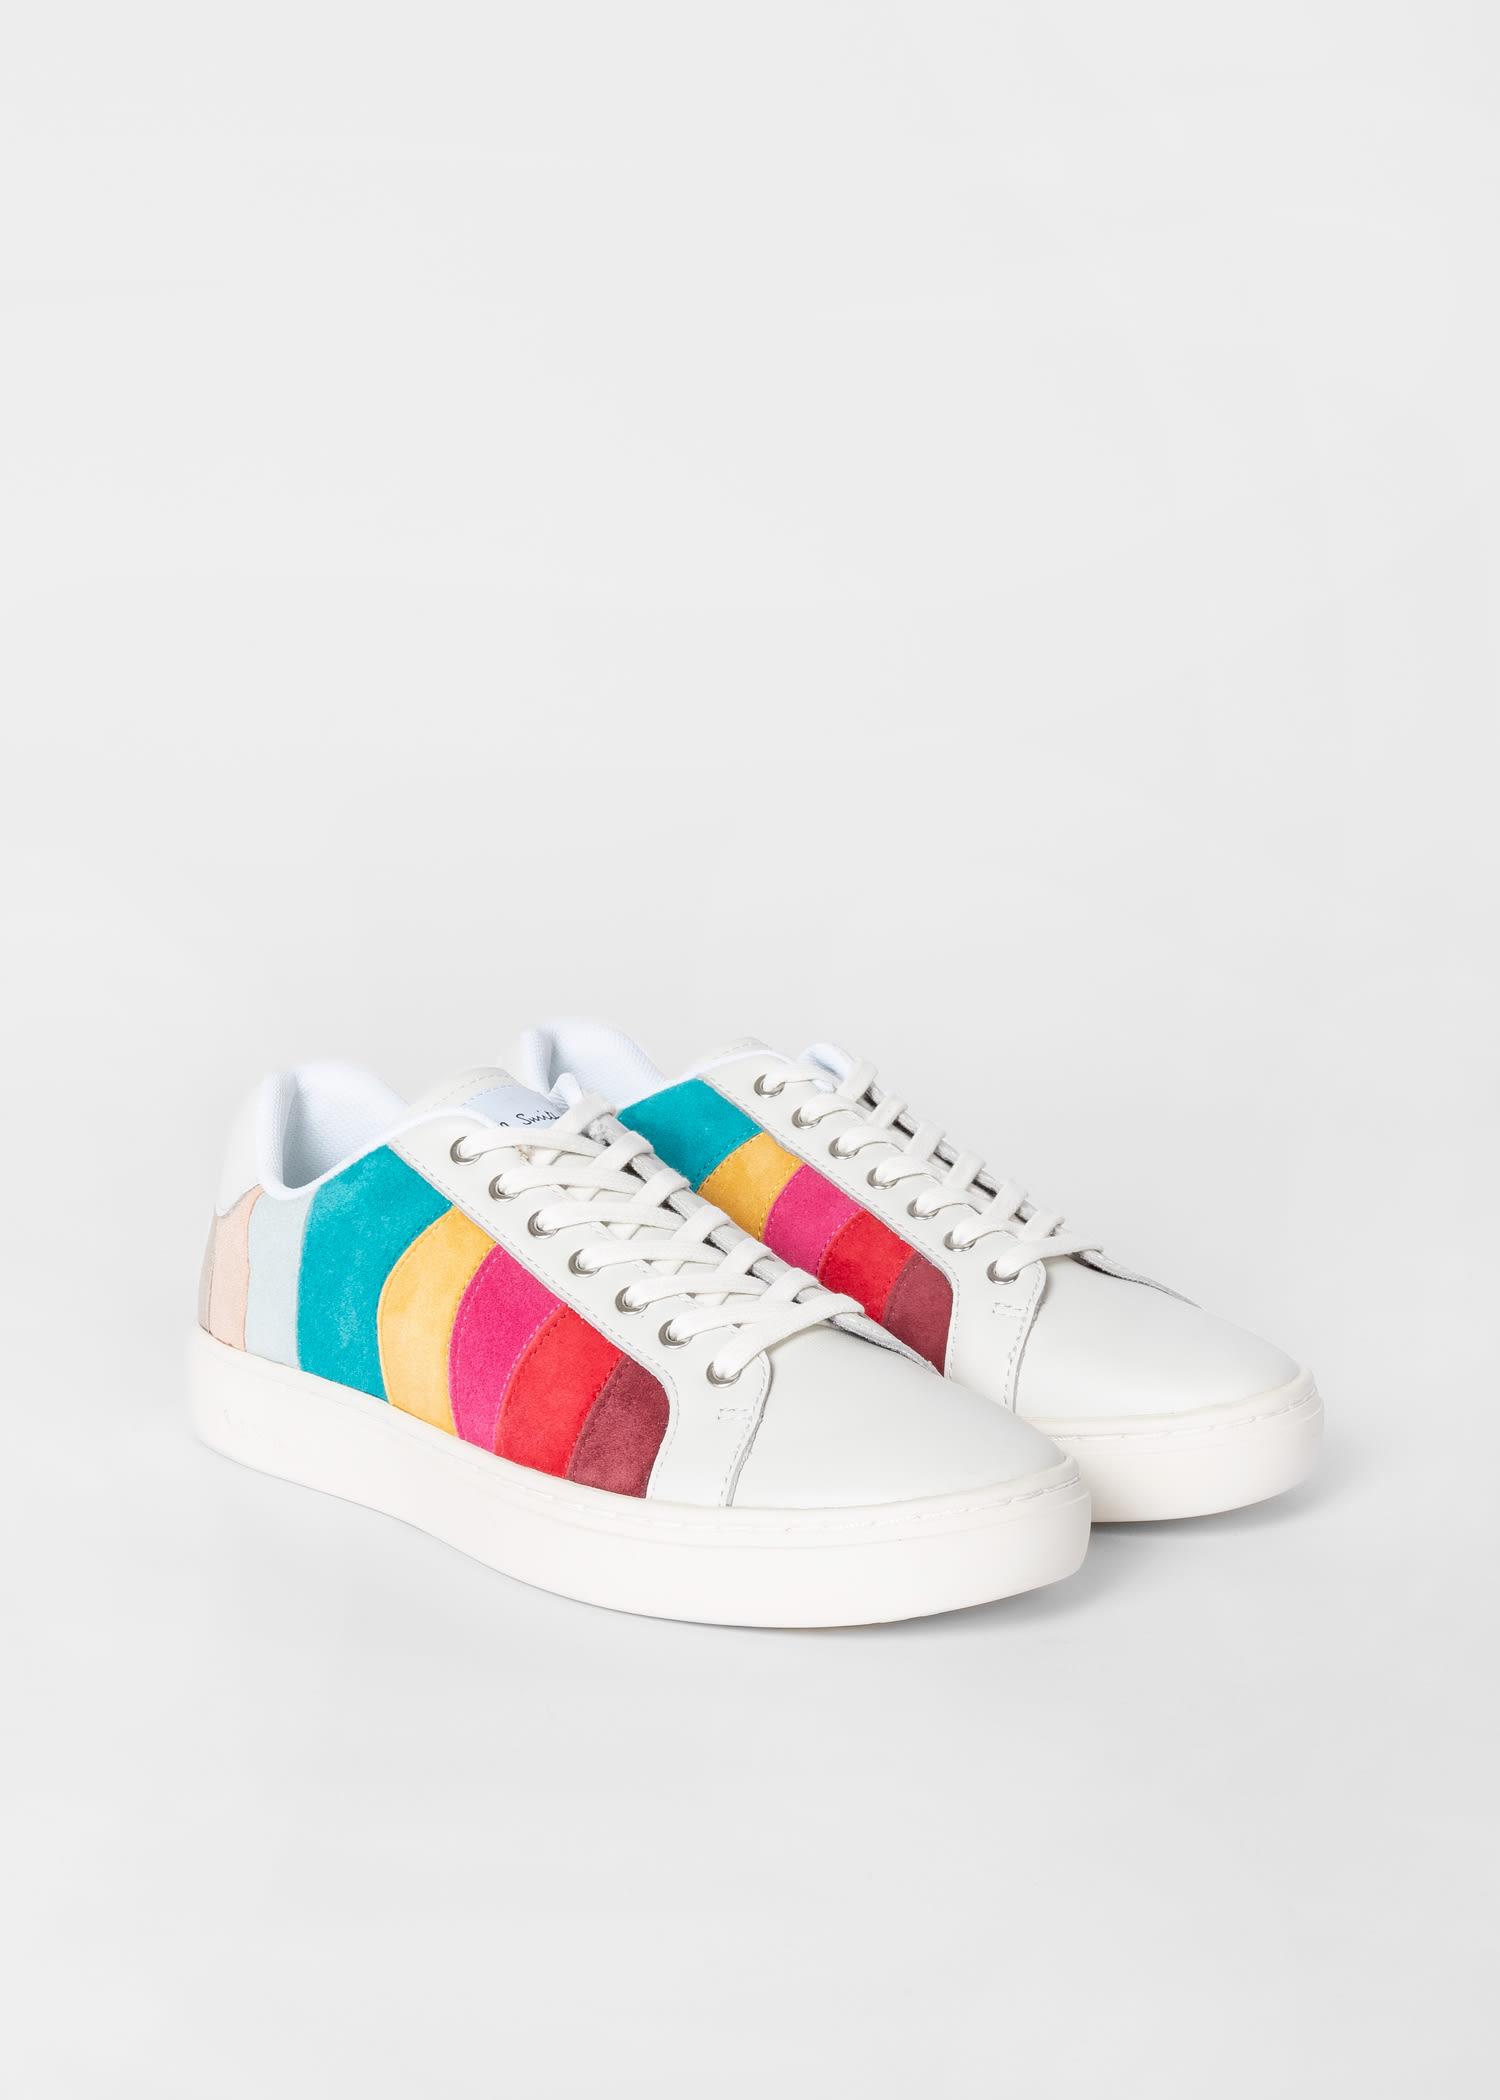 Paul Smith Swirl Leather 'lapin' Trainers - Lyst